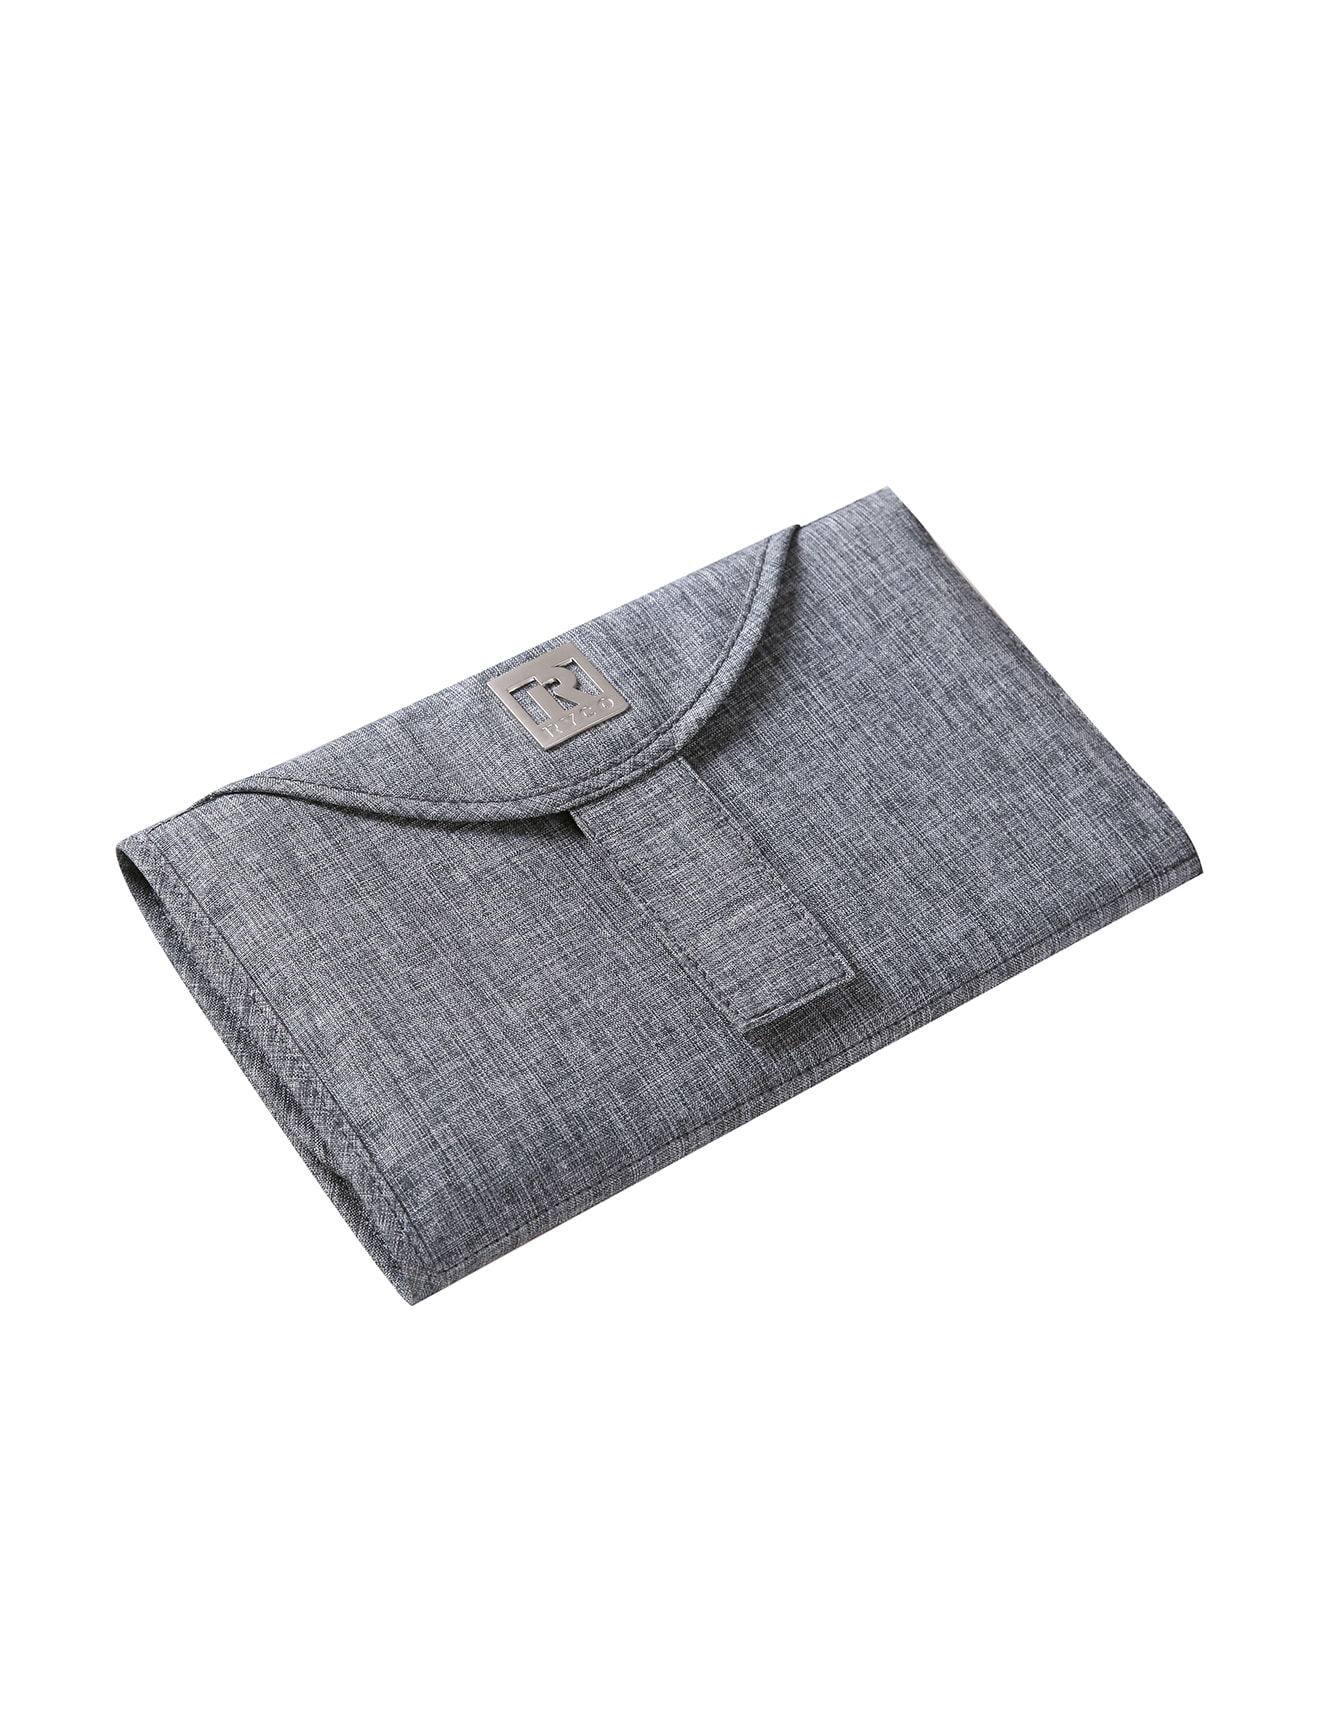 Ryco Deluxe Change Mat with Pockets, Grey product photo